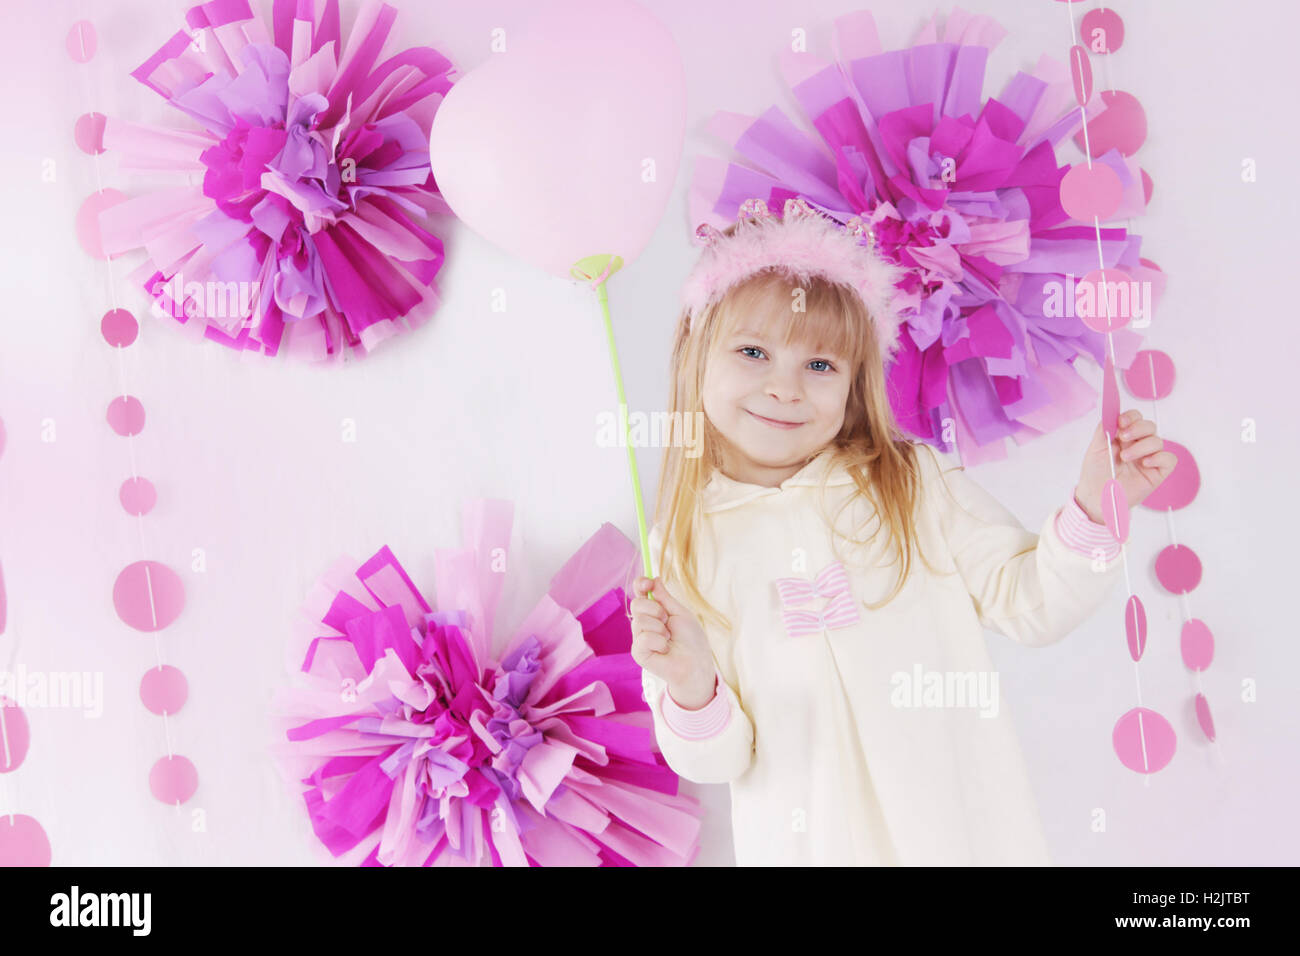 Little girl at pink decorated birthday party with balloon Stock Photo